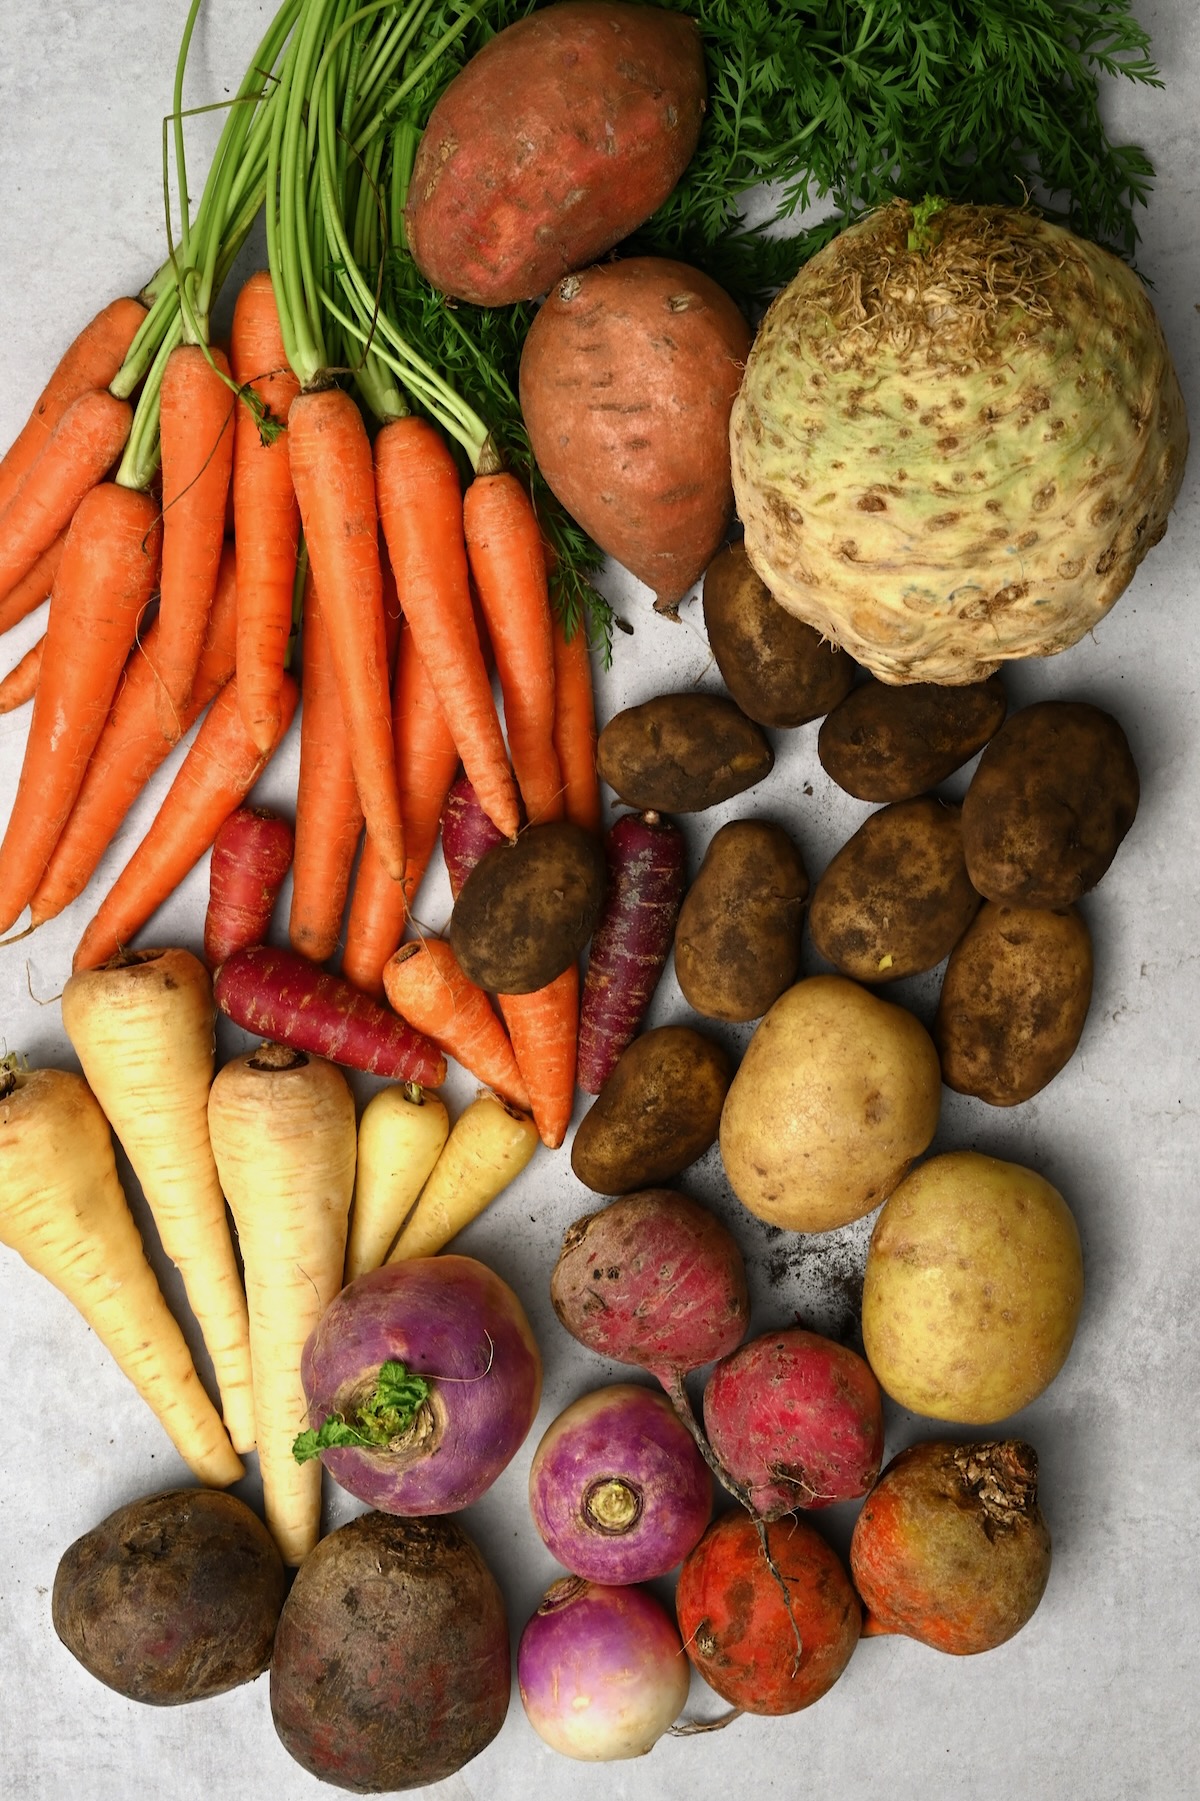 Different types of winter root vegetables on a flat surface